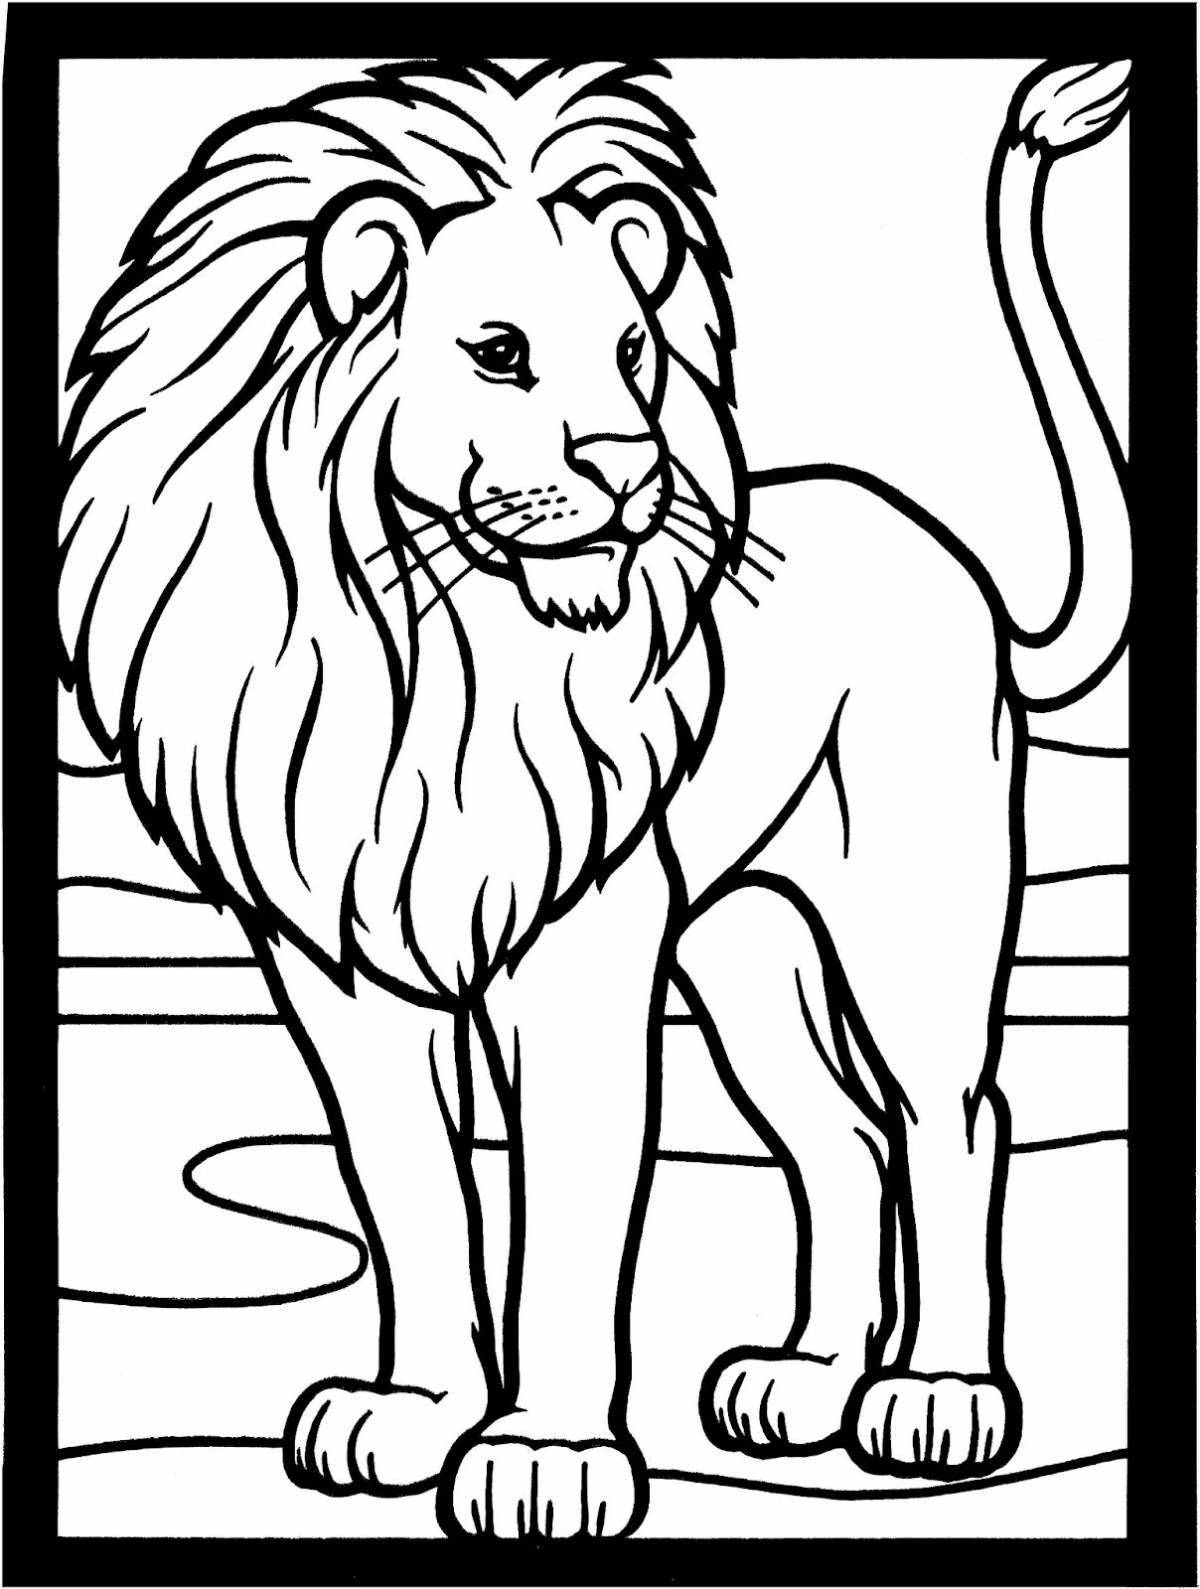 Shiny lion coloring page